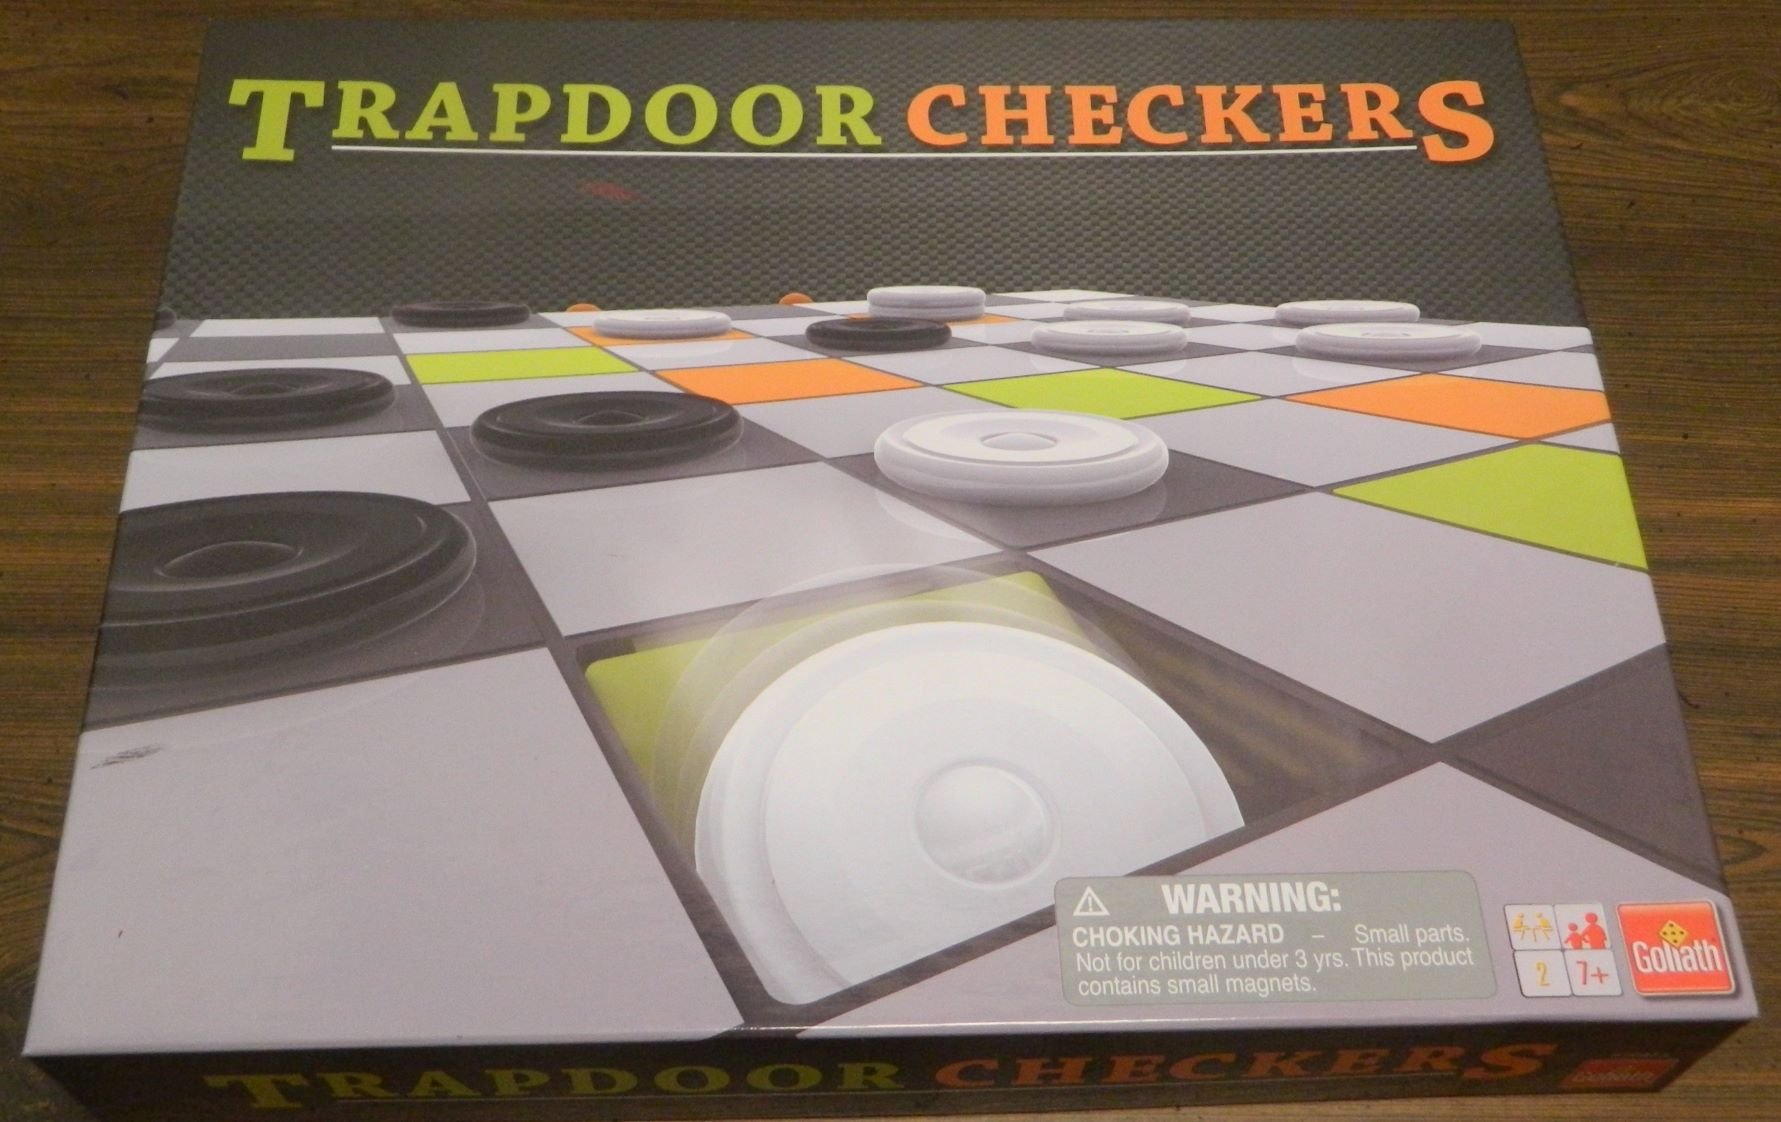 Box for Trapdoor Checkers